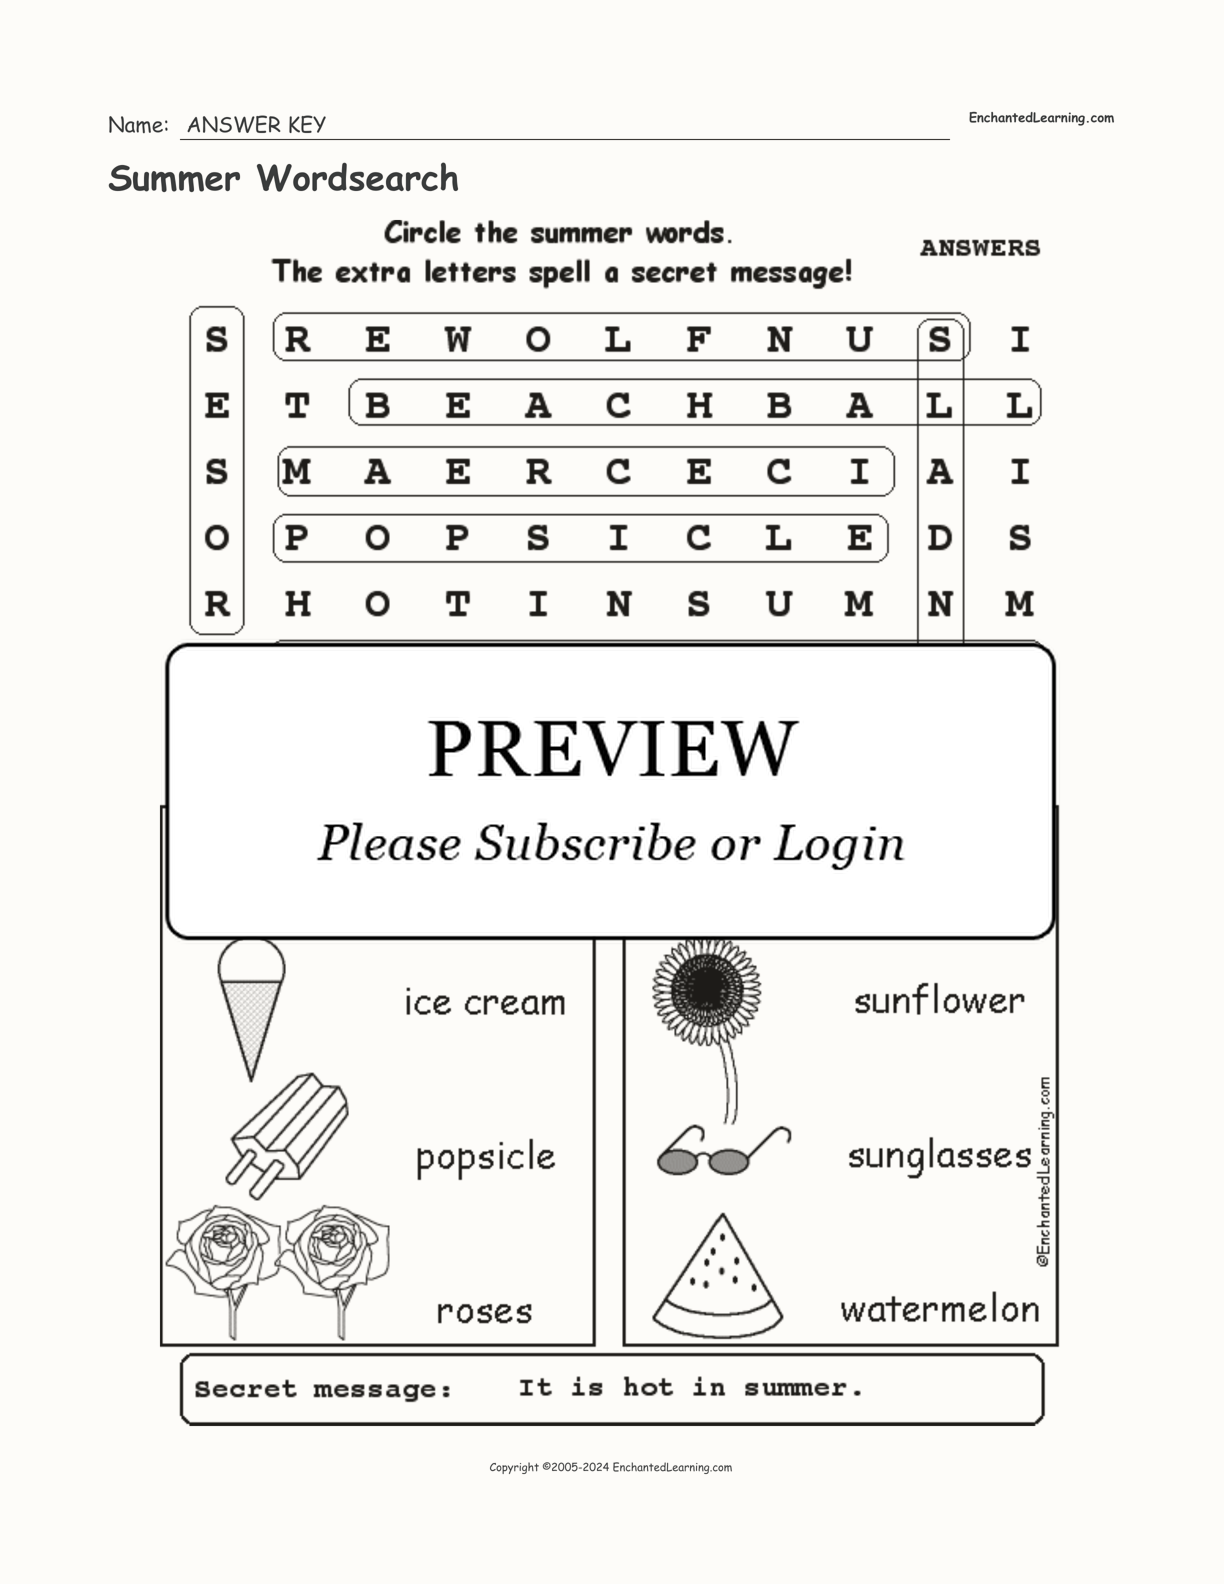 Summer Wordsearch interactive worksheet page 2